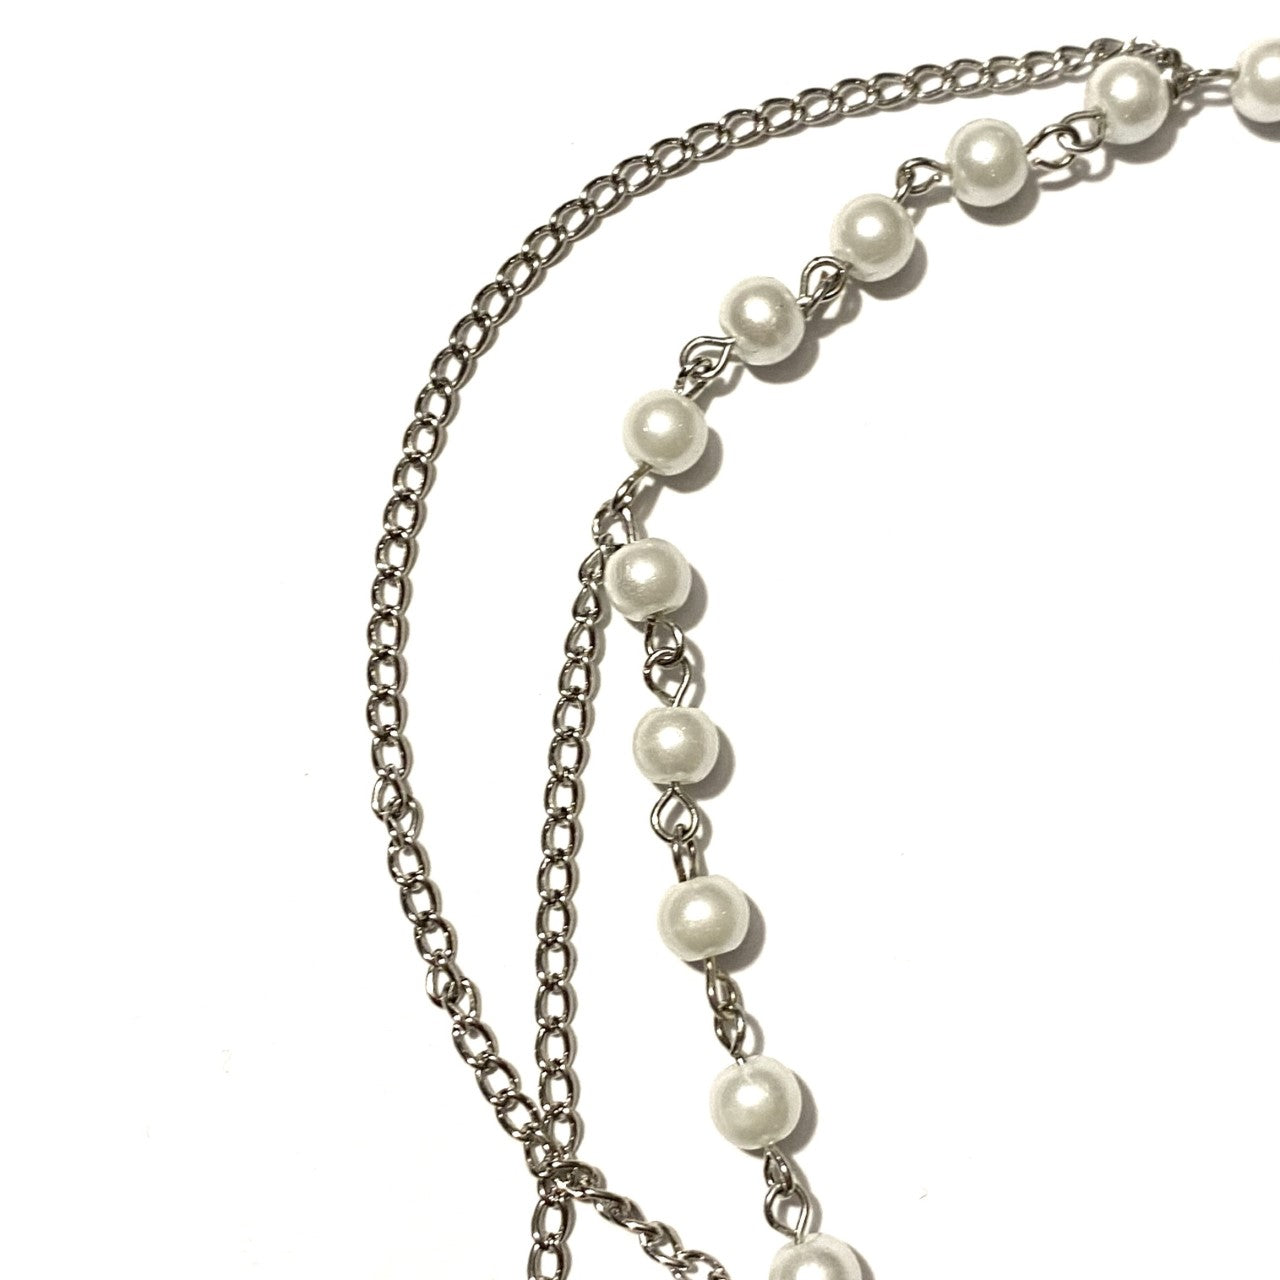 Necklace with White Pearls and a Silver Cross